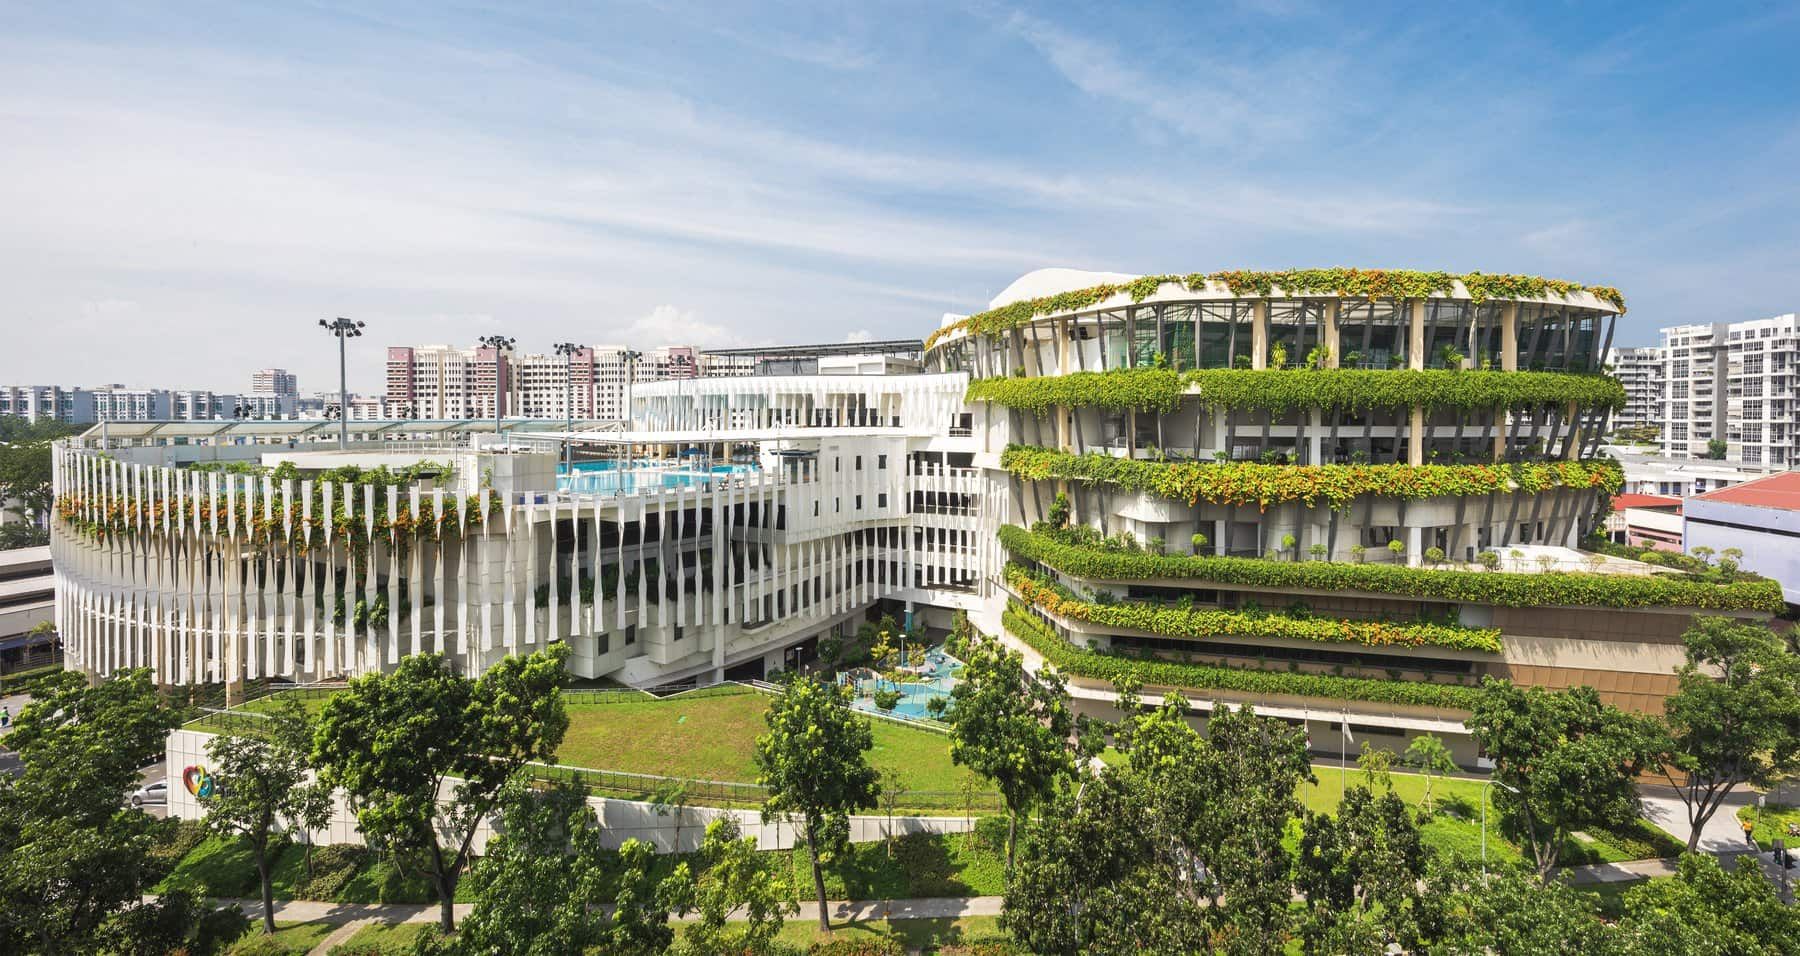 Exterior view of Heartbeat @ Bedok in Singapore showing the landscape